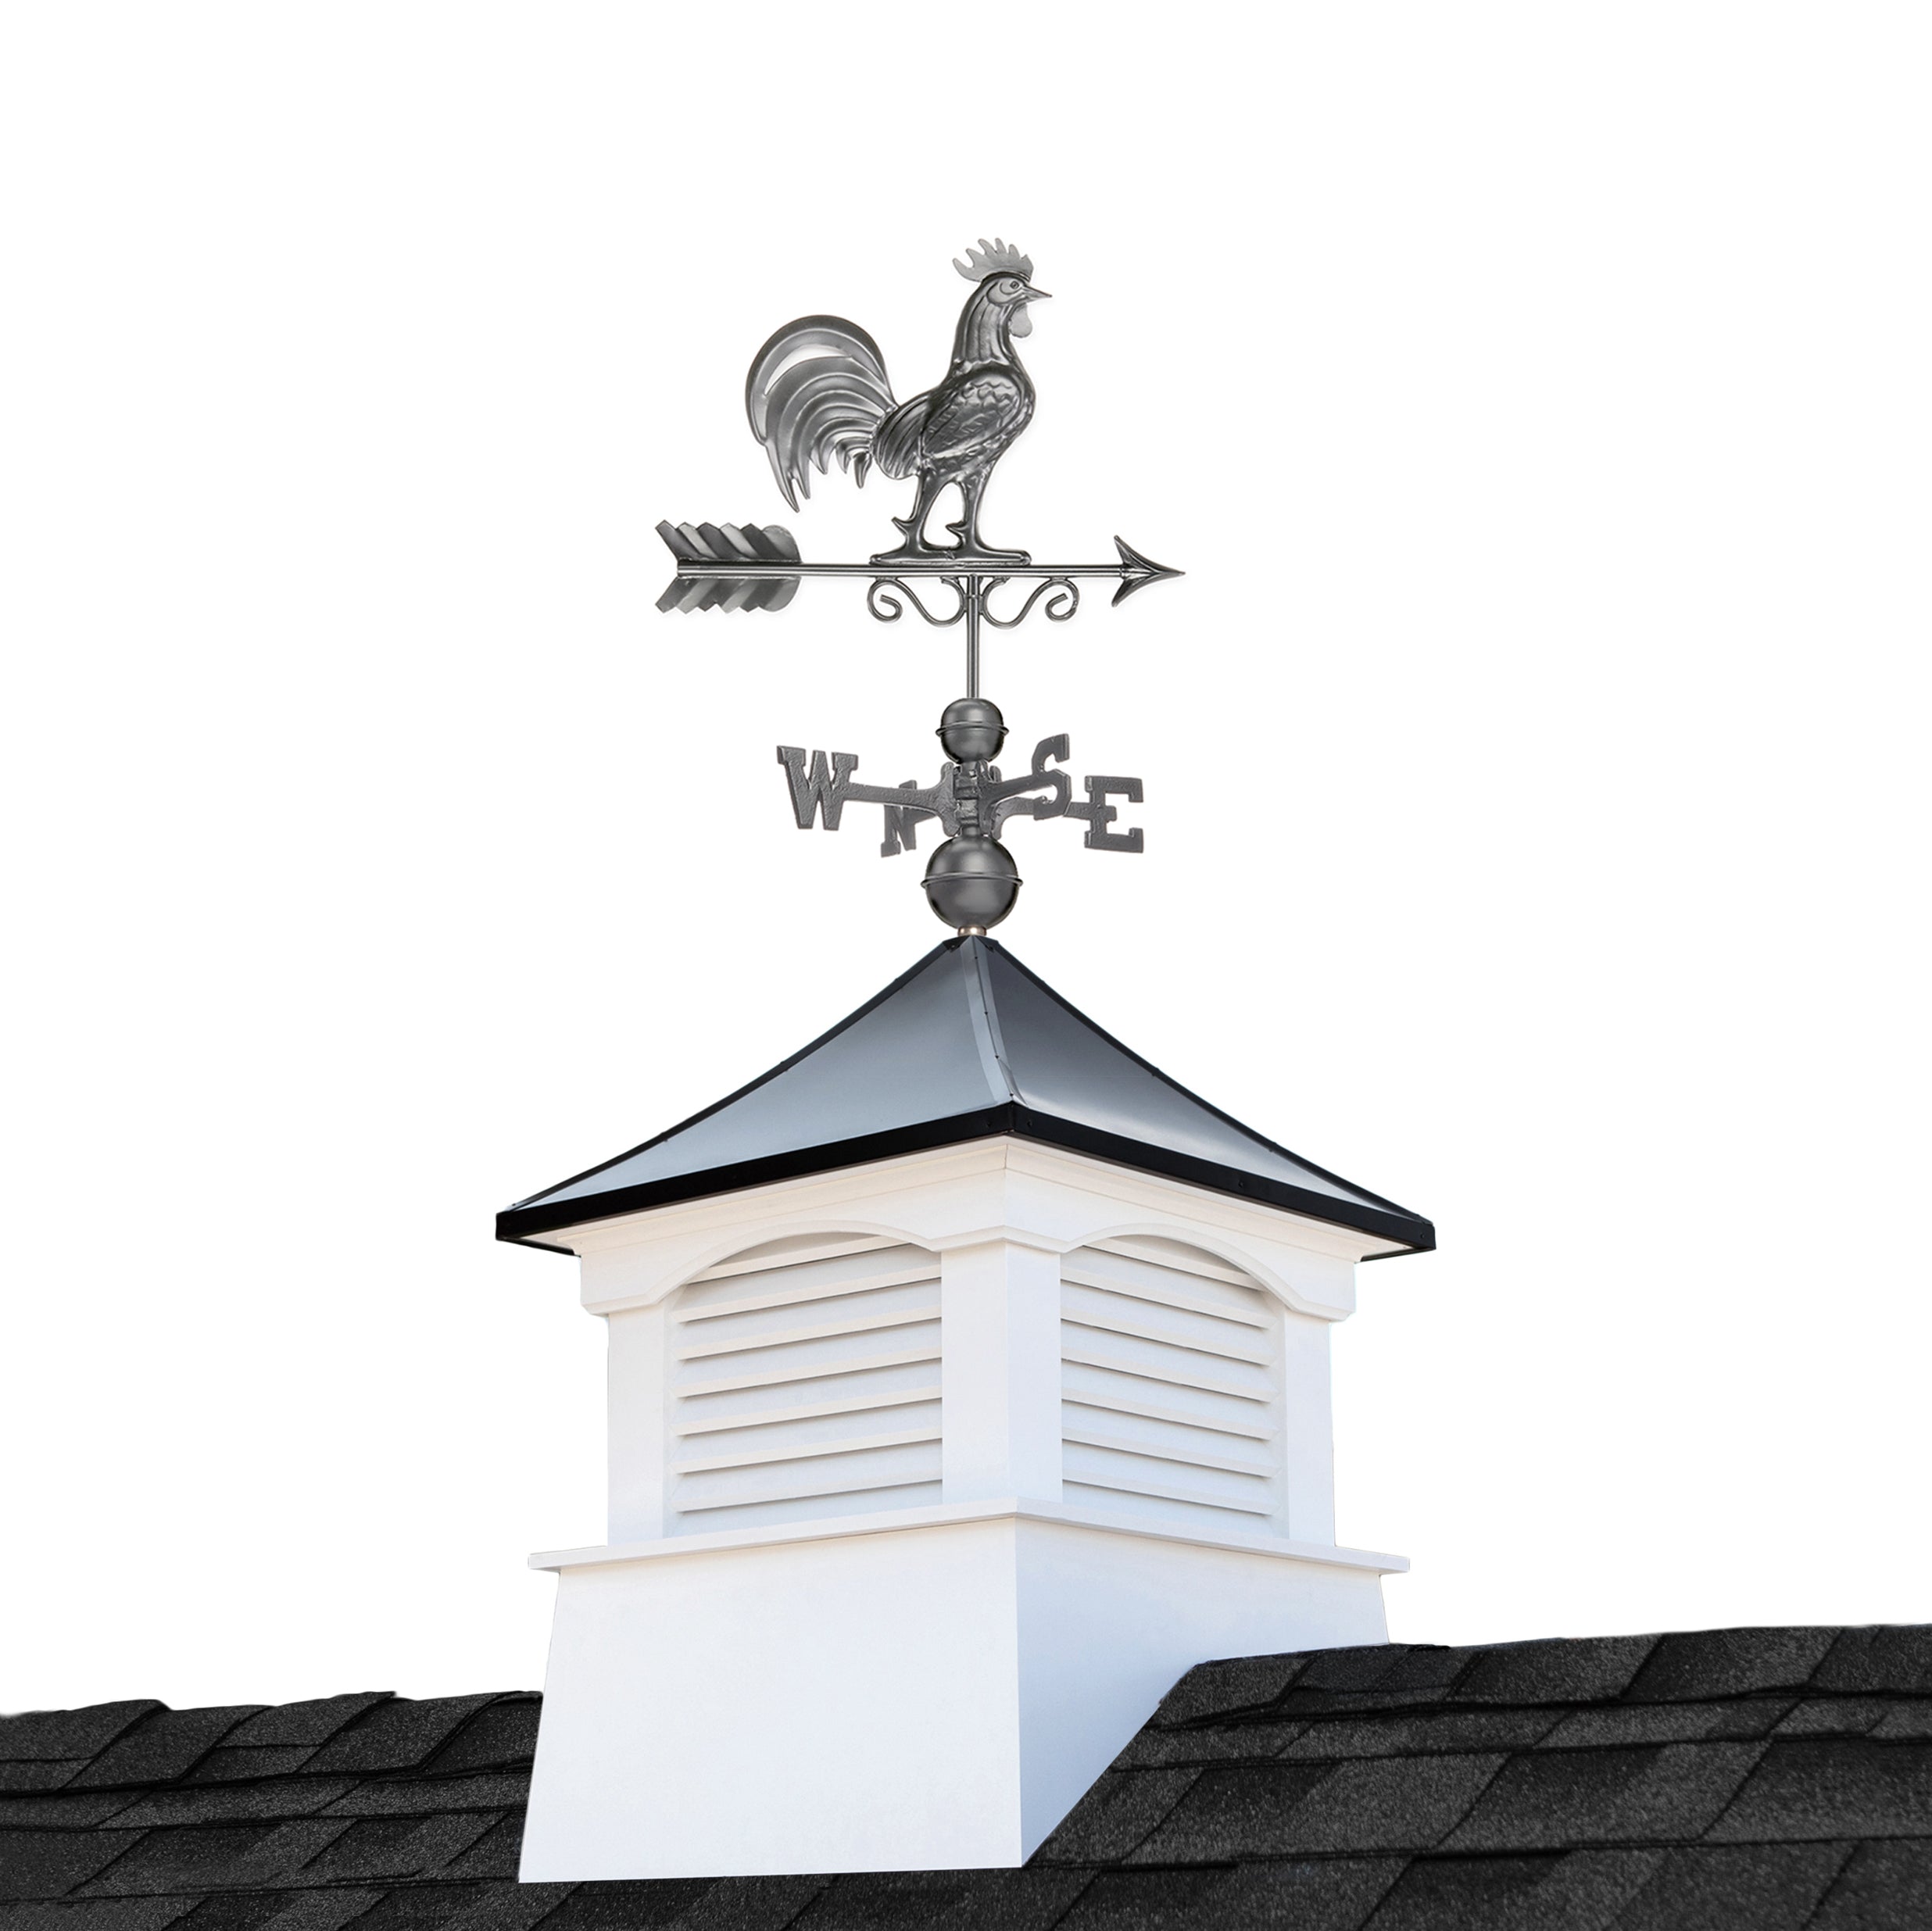 26" Square Coventry Vinyl Cupola with Black Aluminum roof and Dark Zinc Aluminum Rooster Weathervane